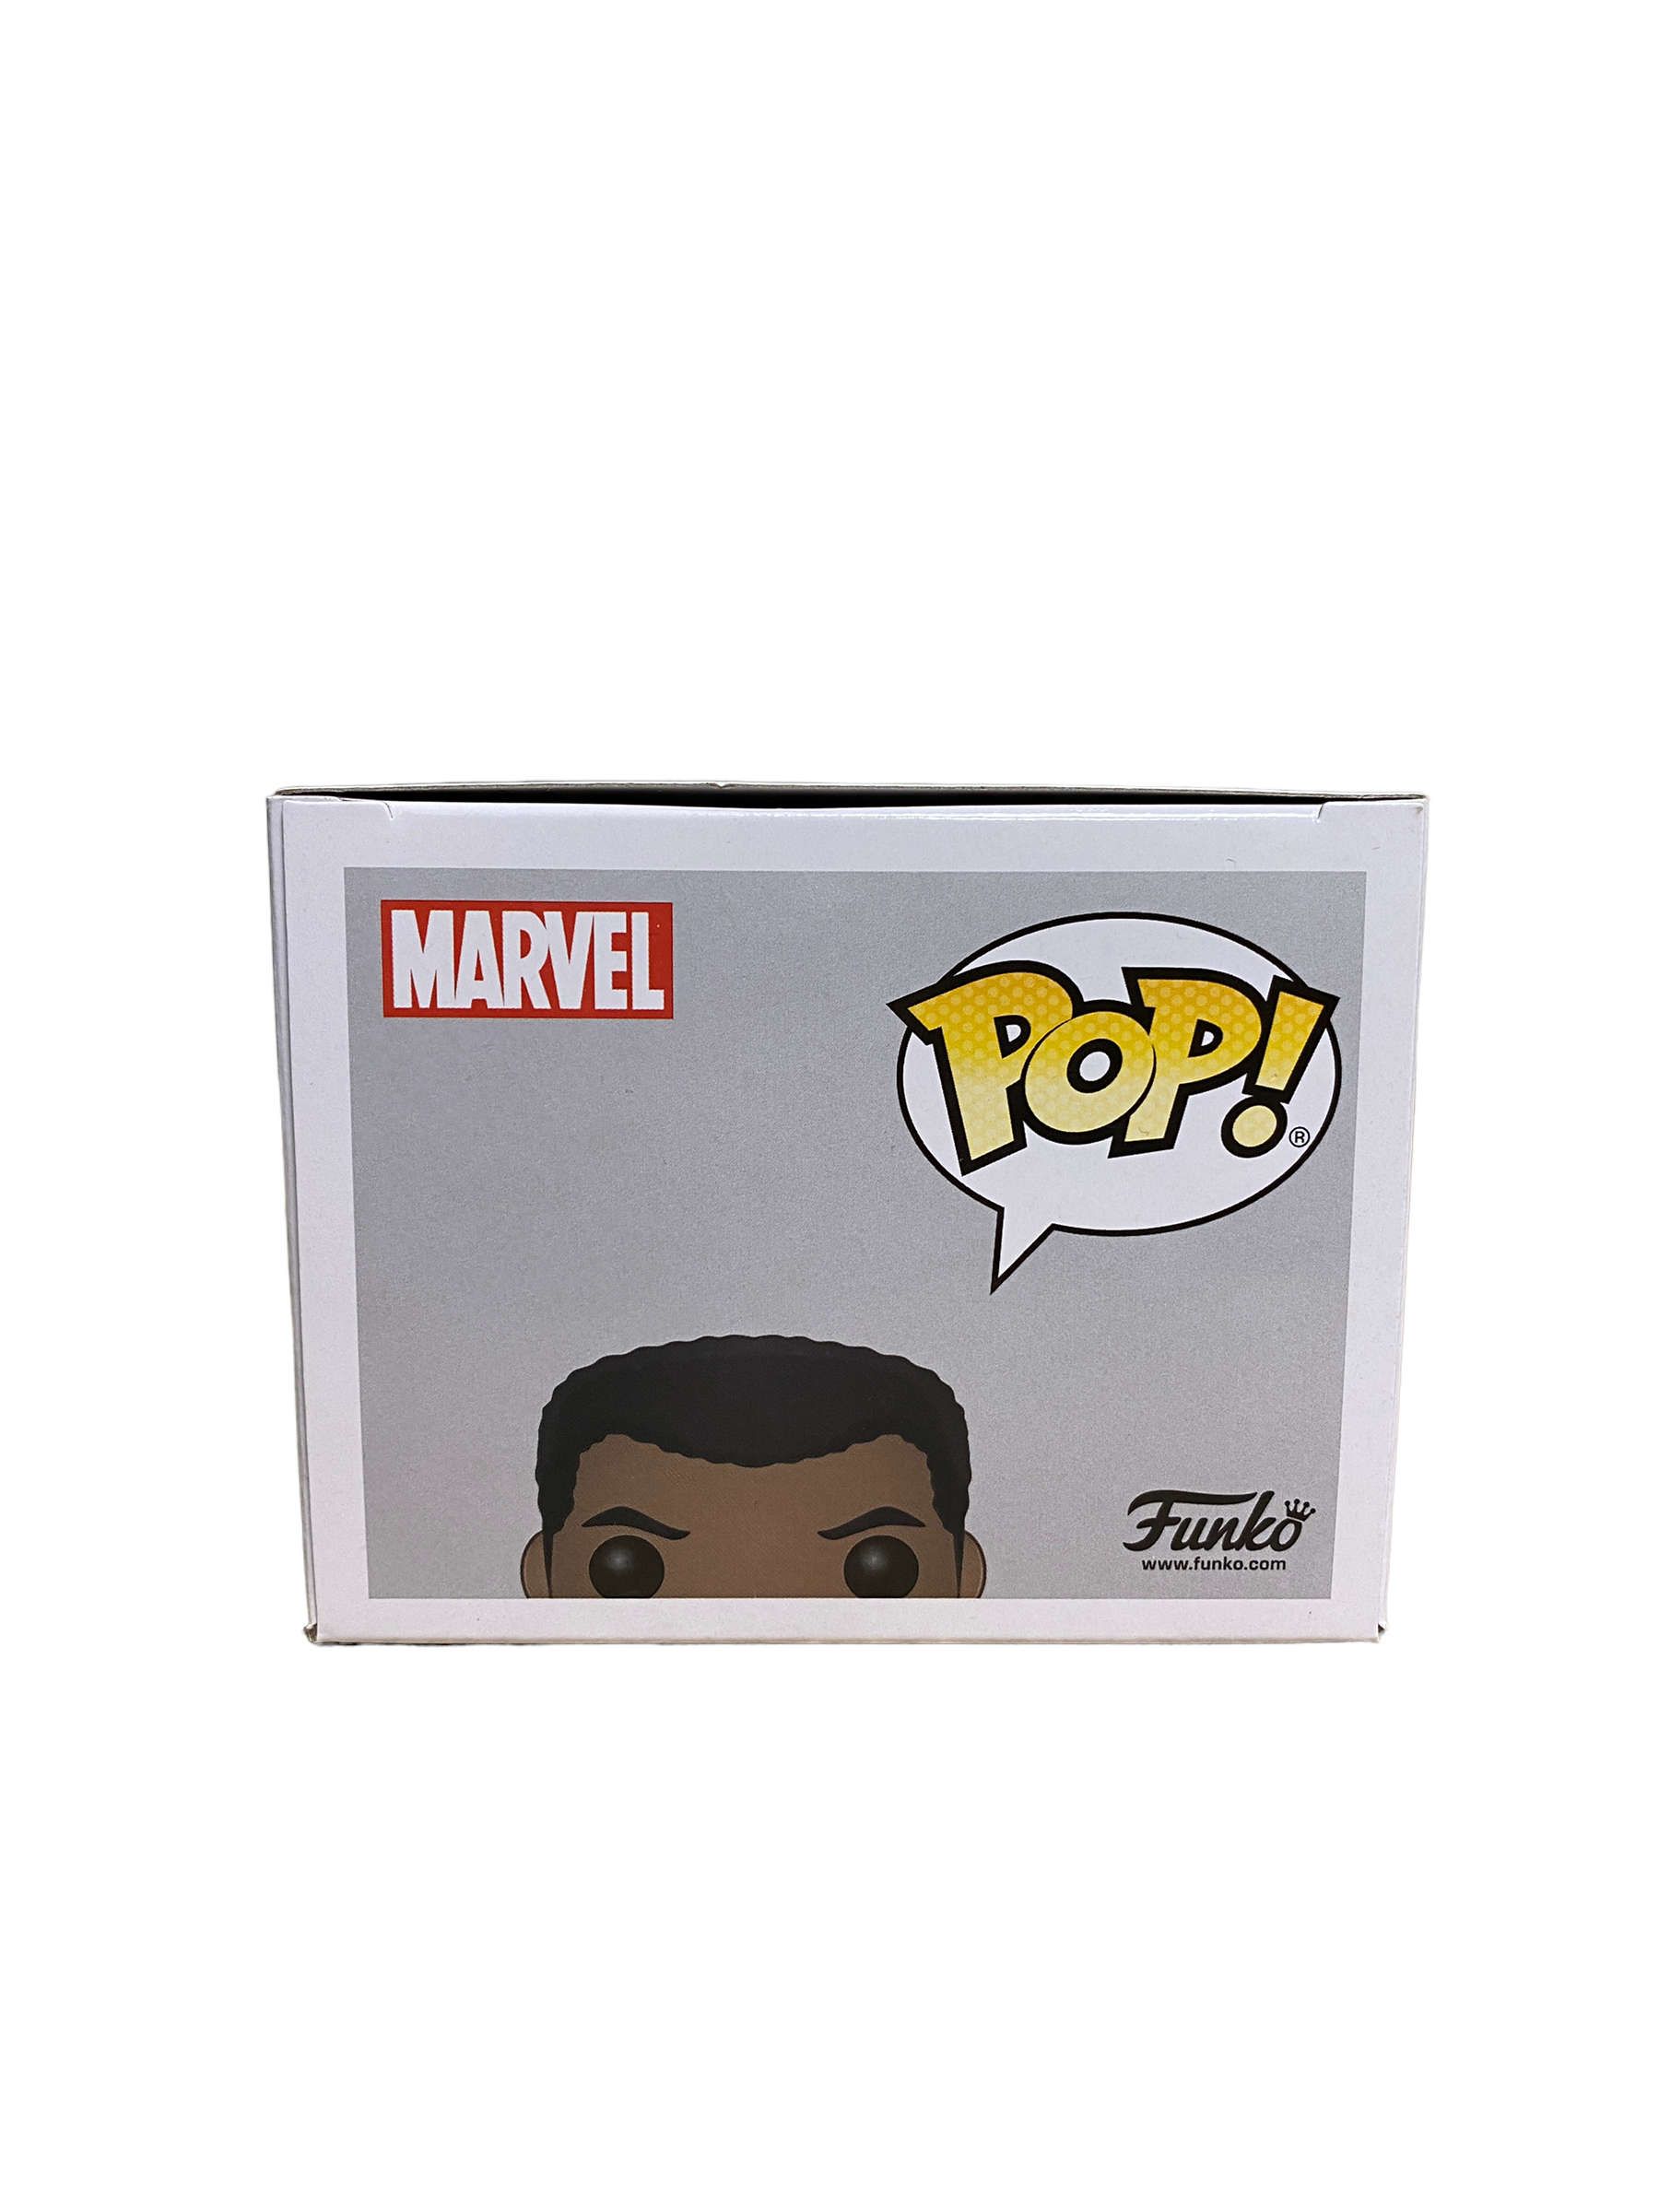 Nick Fury With Goose The Cat #447 Funko Pop! - Captain Marvel - Marvel Collector Corps Exclusive - Condition 8.75/10